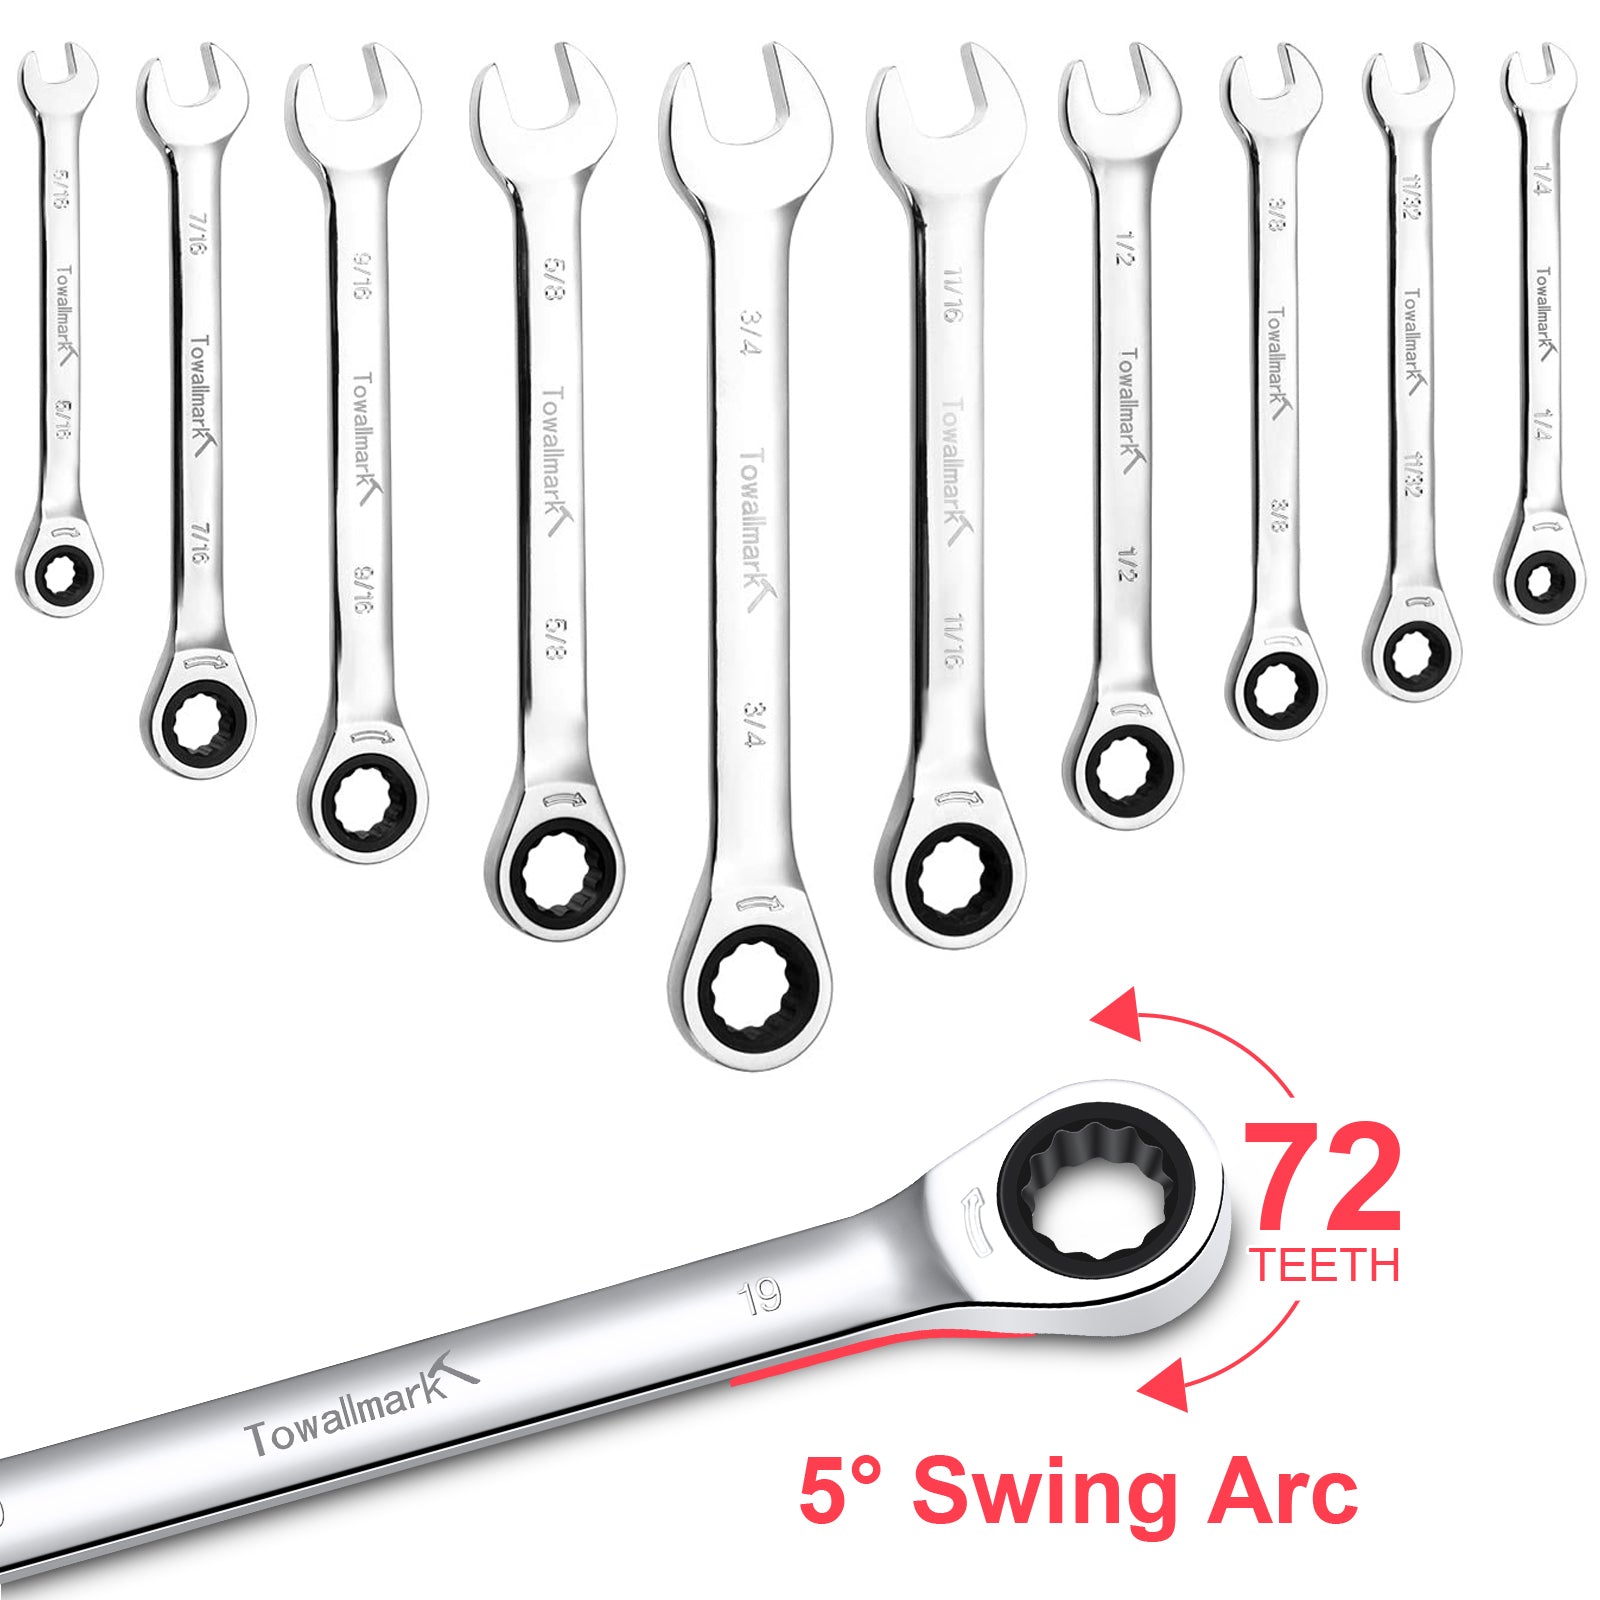 GARVEE TOWALLMARK 20-Piece SAE Metric Ratcheting Combination Wrench Set Ratchet Wrenches Set